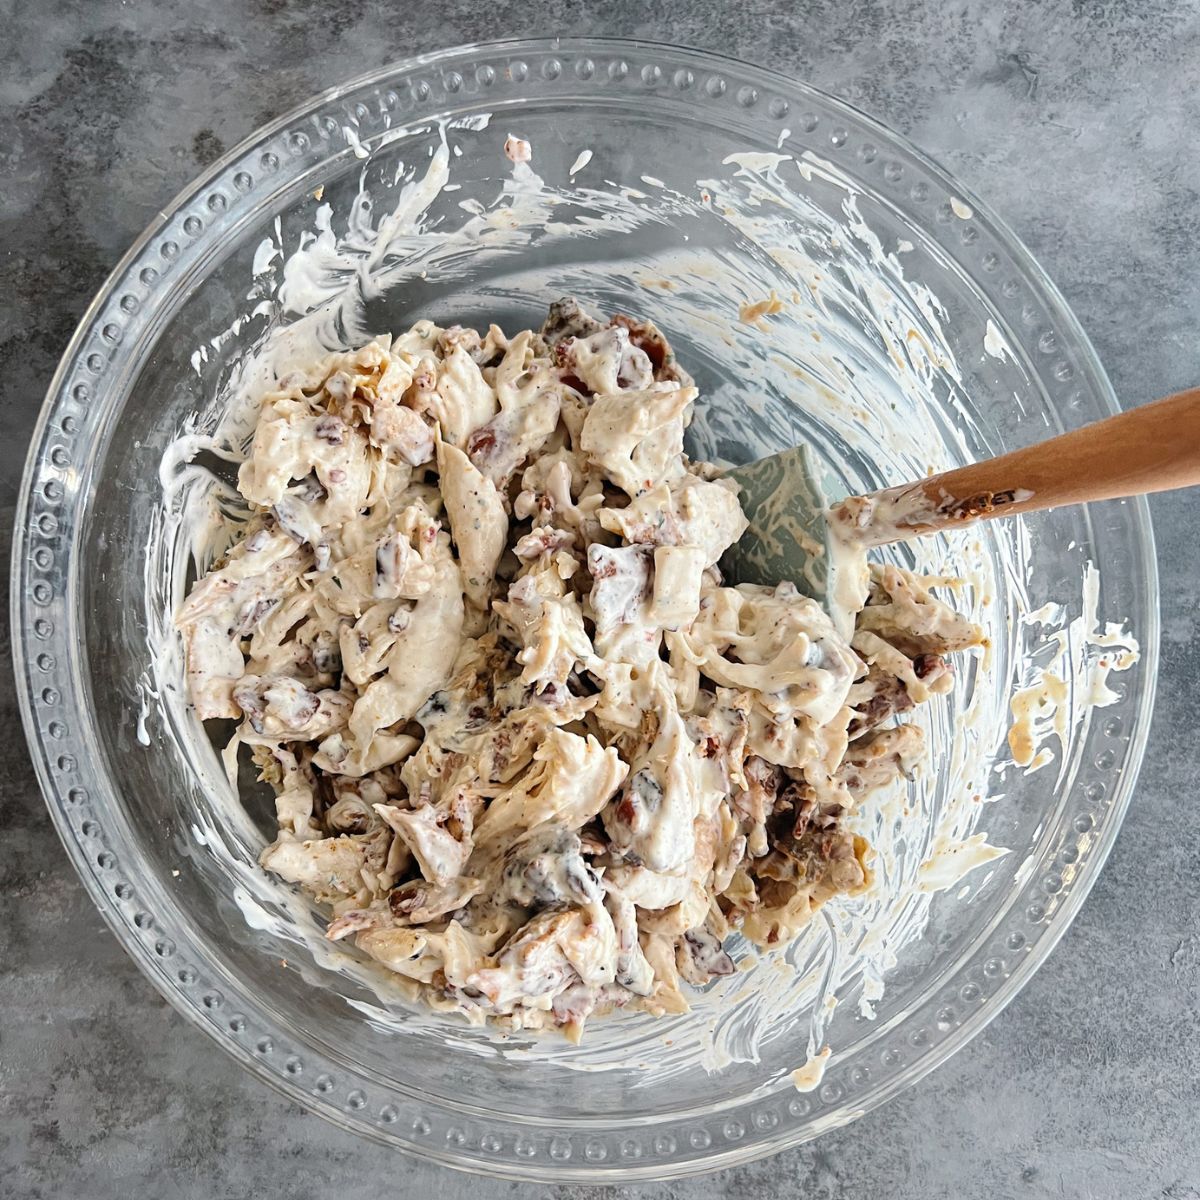 Shredded chicken, bacon, and ranch mixed together in a mixing bowl with a rubber spatula in it.